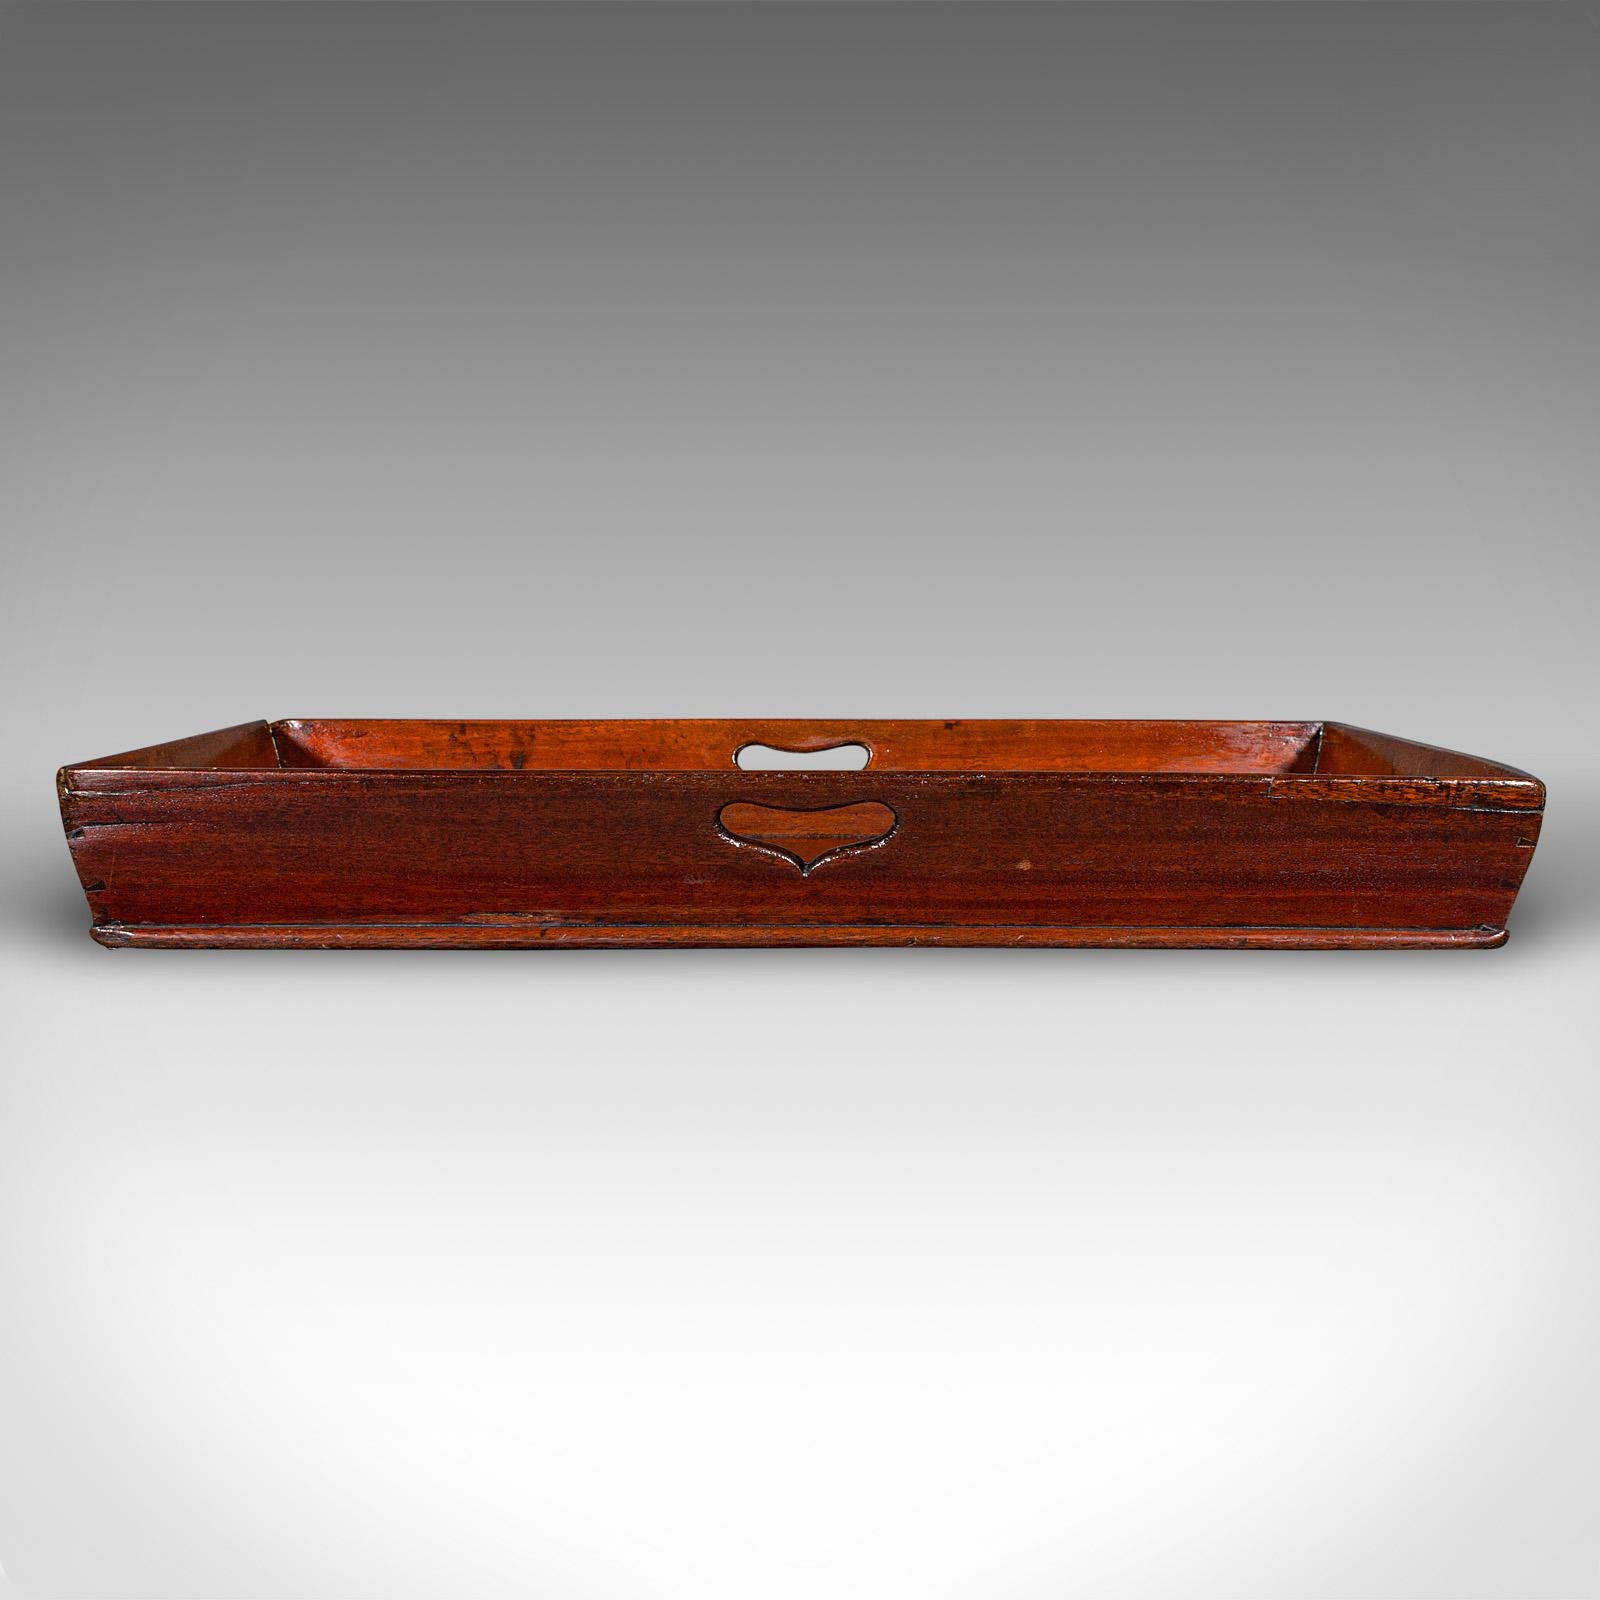 
This is a large antique butler's polishing tray. An English, mahogany serving tray, dating to the Georgian period, circa 1800.

Generously sized and with appealing, deep sides
Displays a desirable aged patina and in good order
Select stocks present